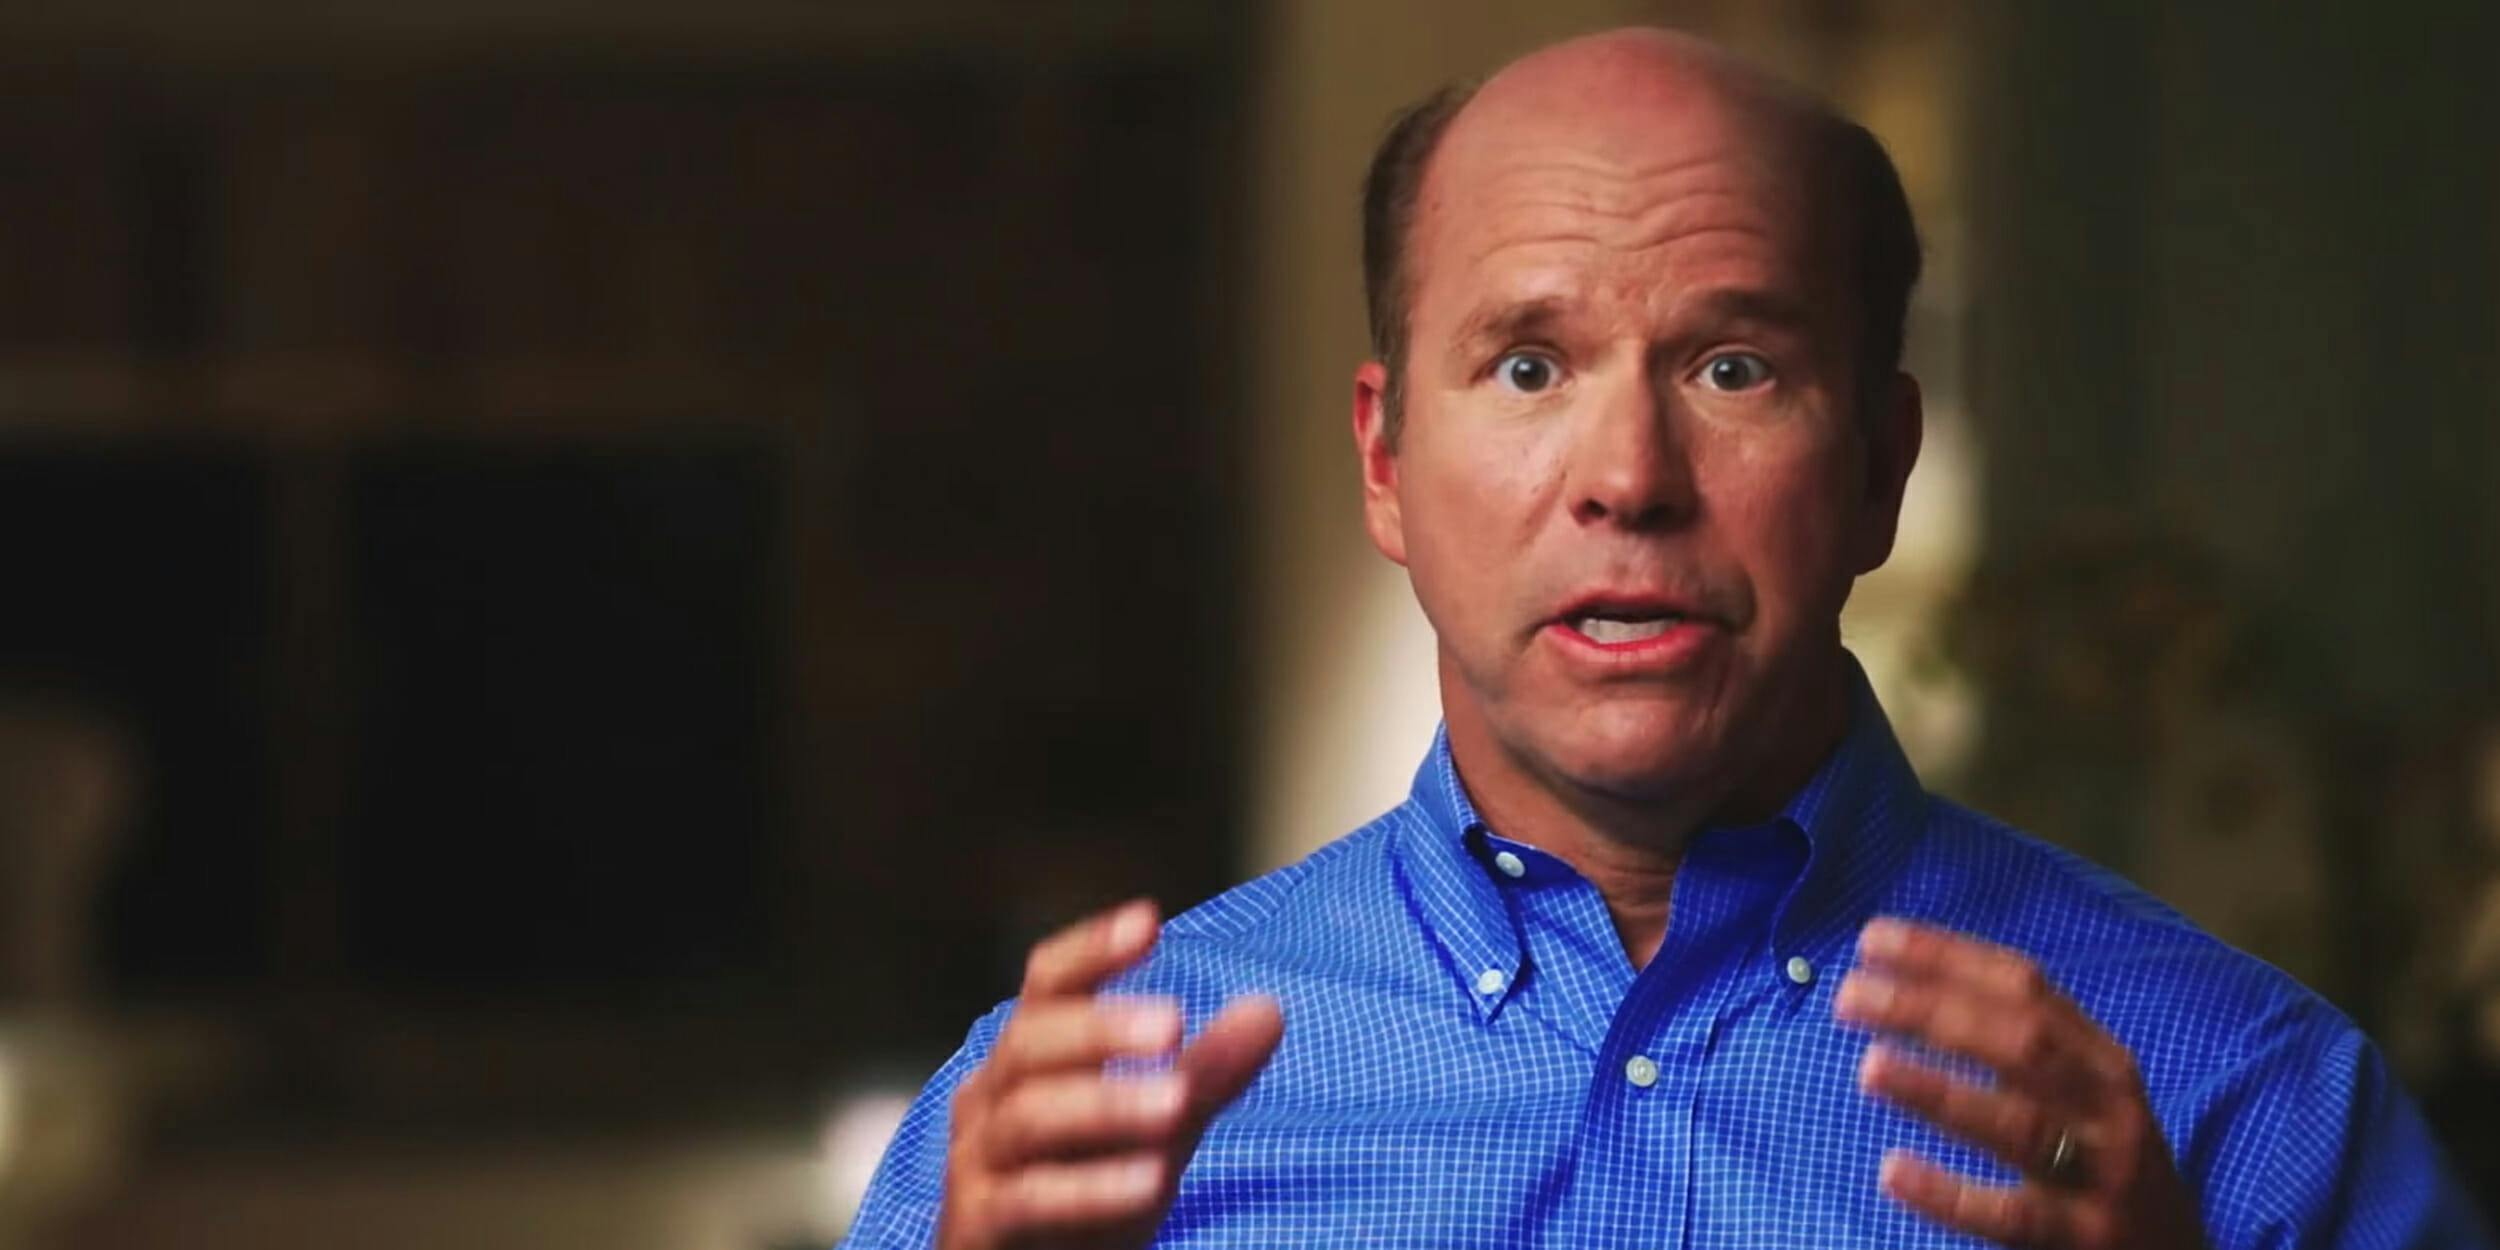 John Delaney is the only person who has announced his candidacy for the Democratic nomination for president in 2020.